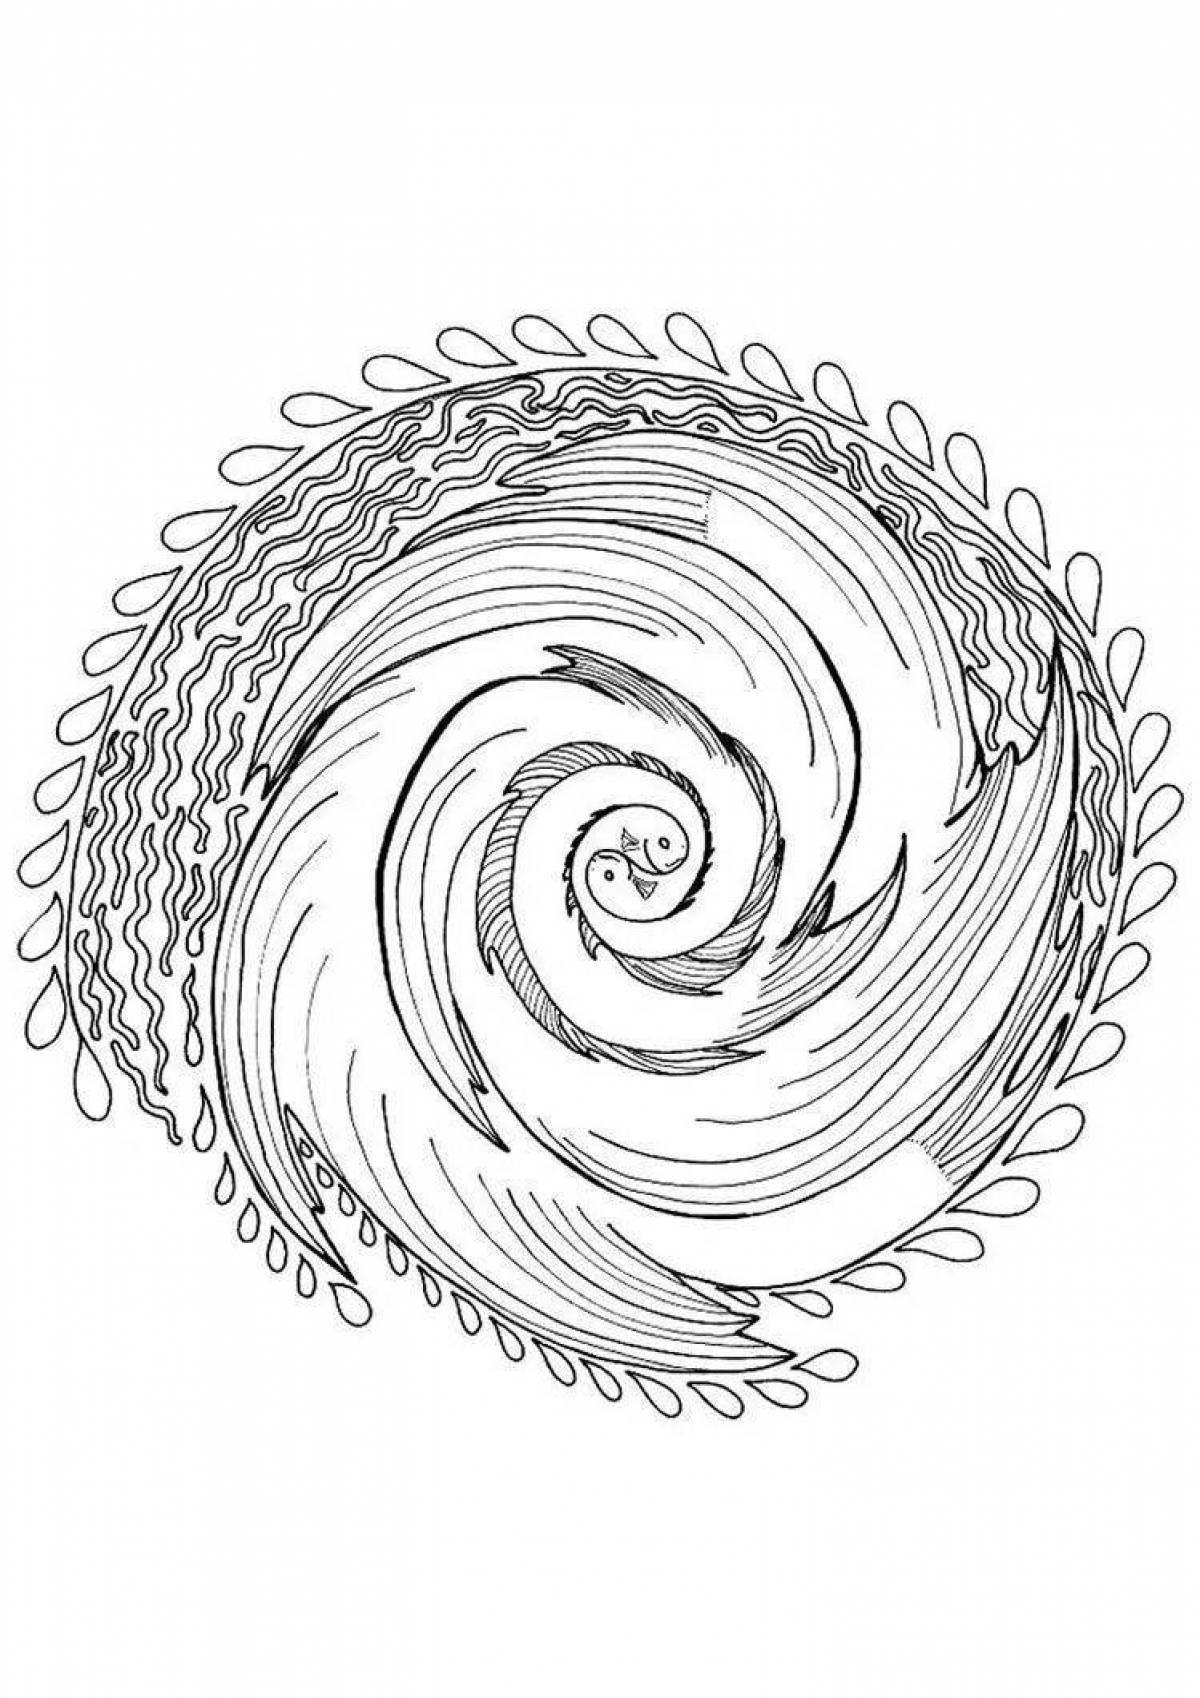 Colouring colorful spiral composition for children